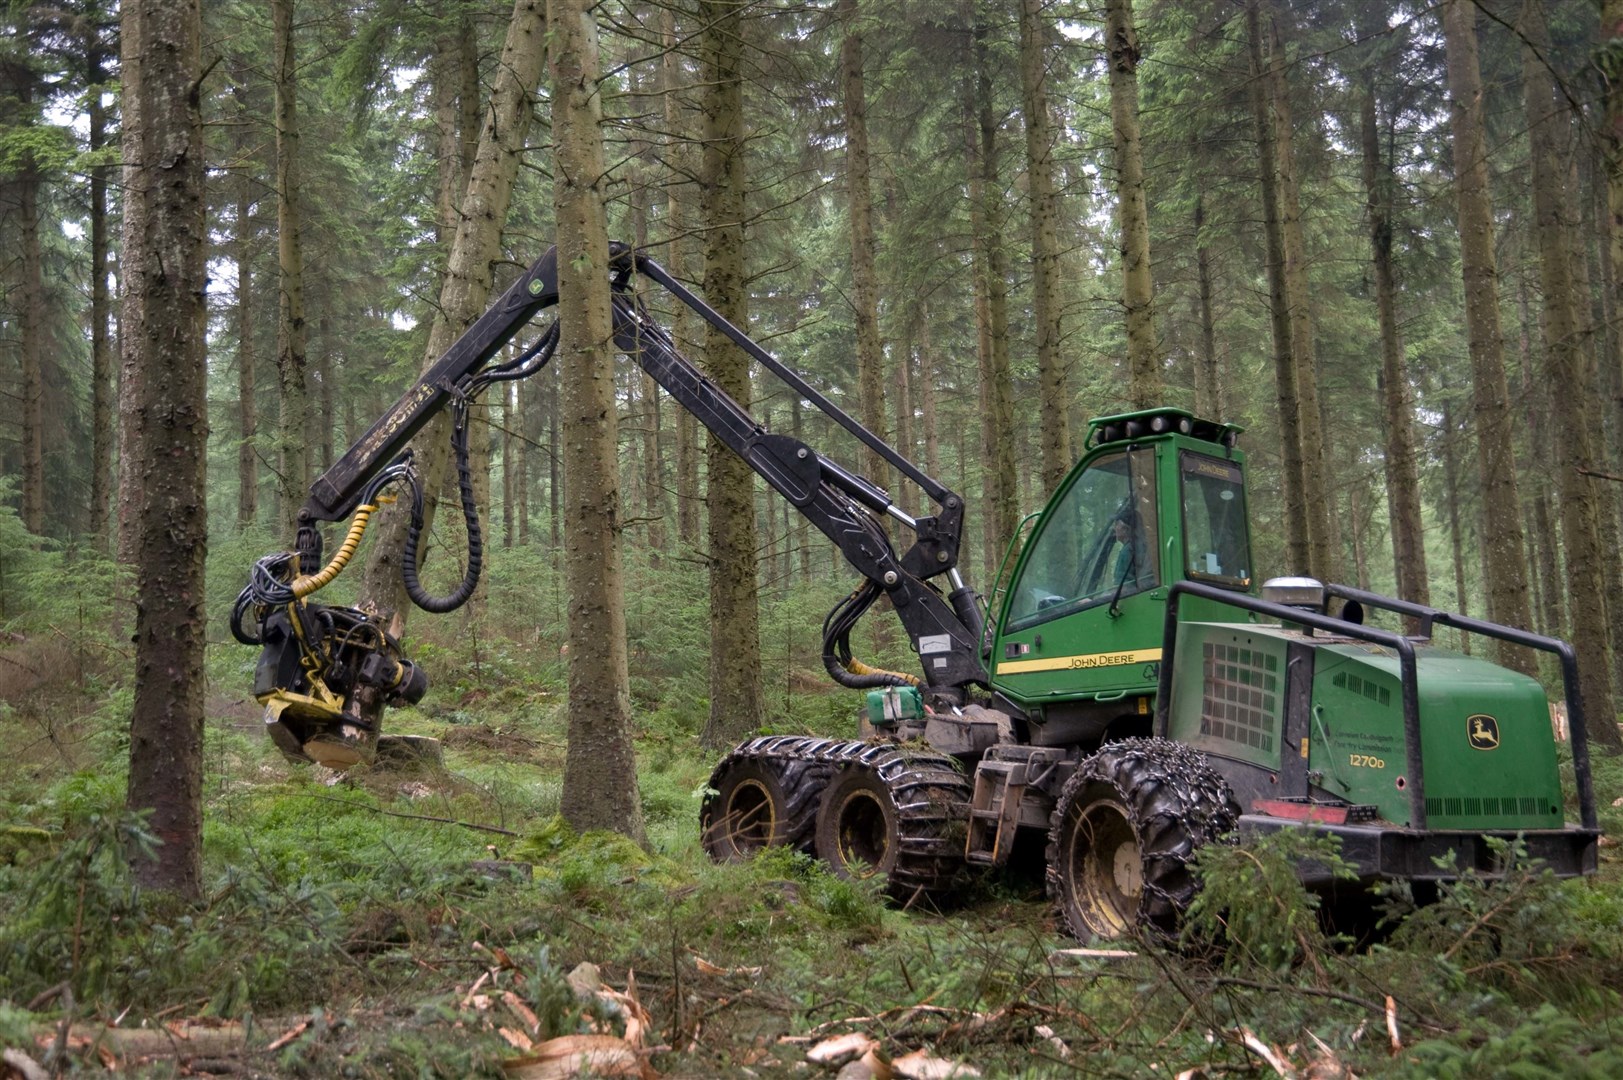 The new intiative is expected to boost employment opportunities in forestry. Picture: www.forestry.gov.uk/pictures